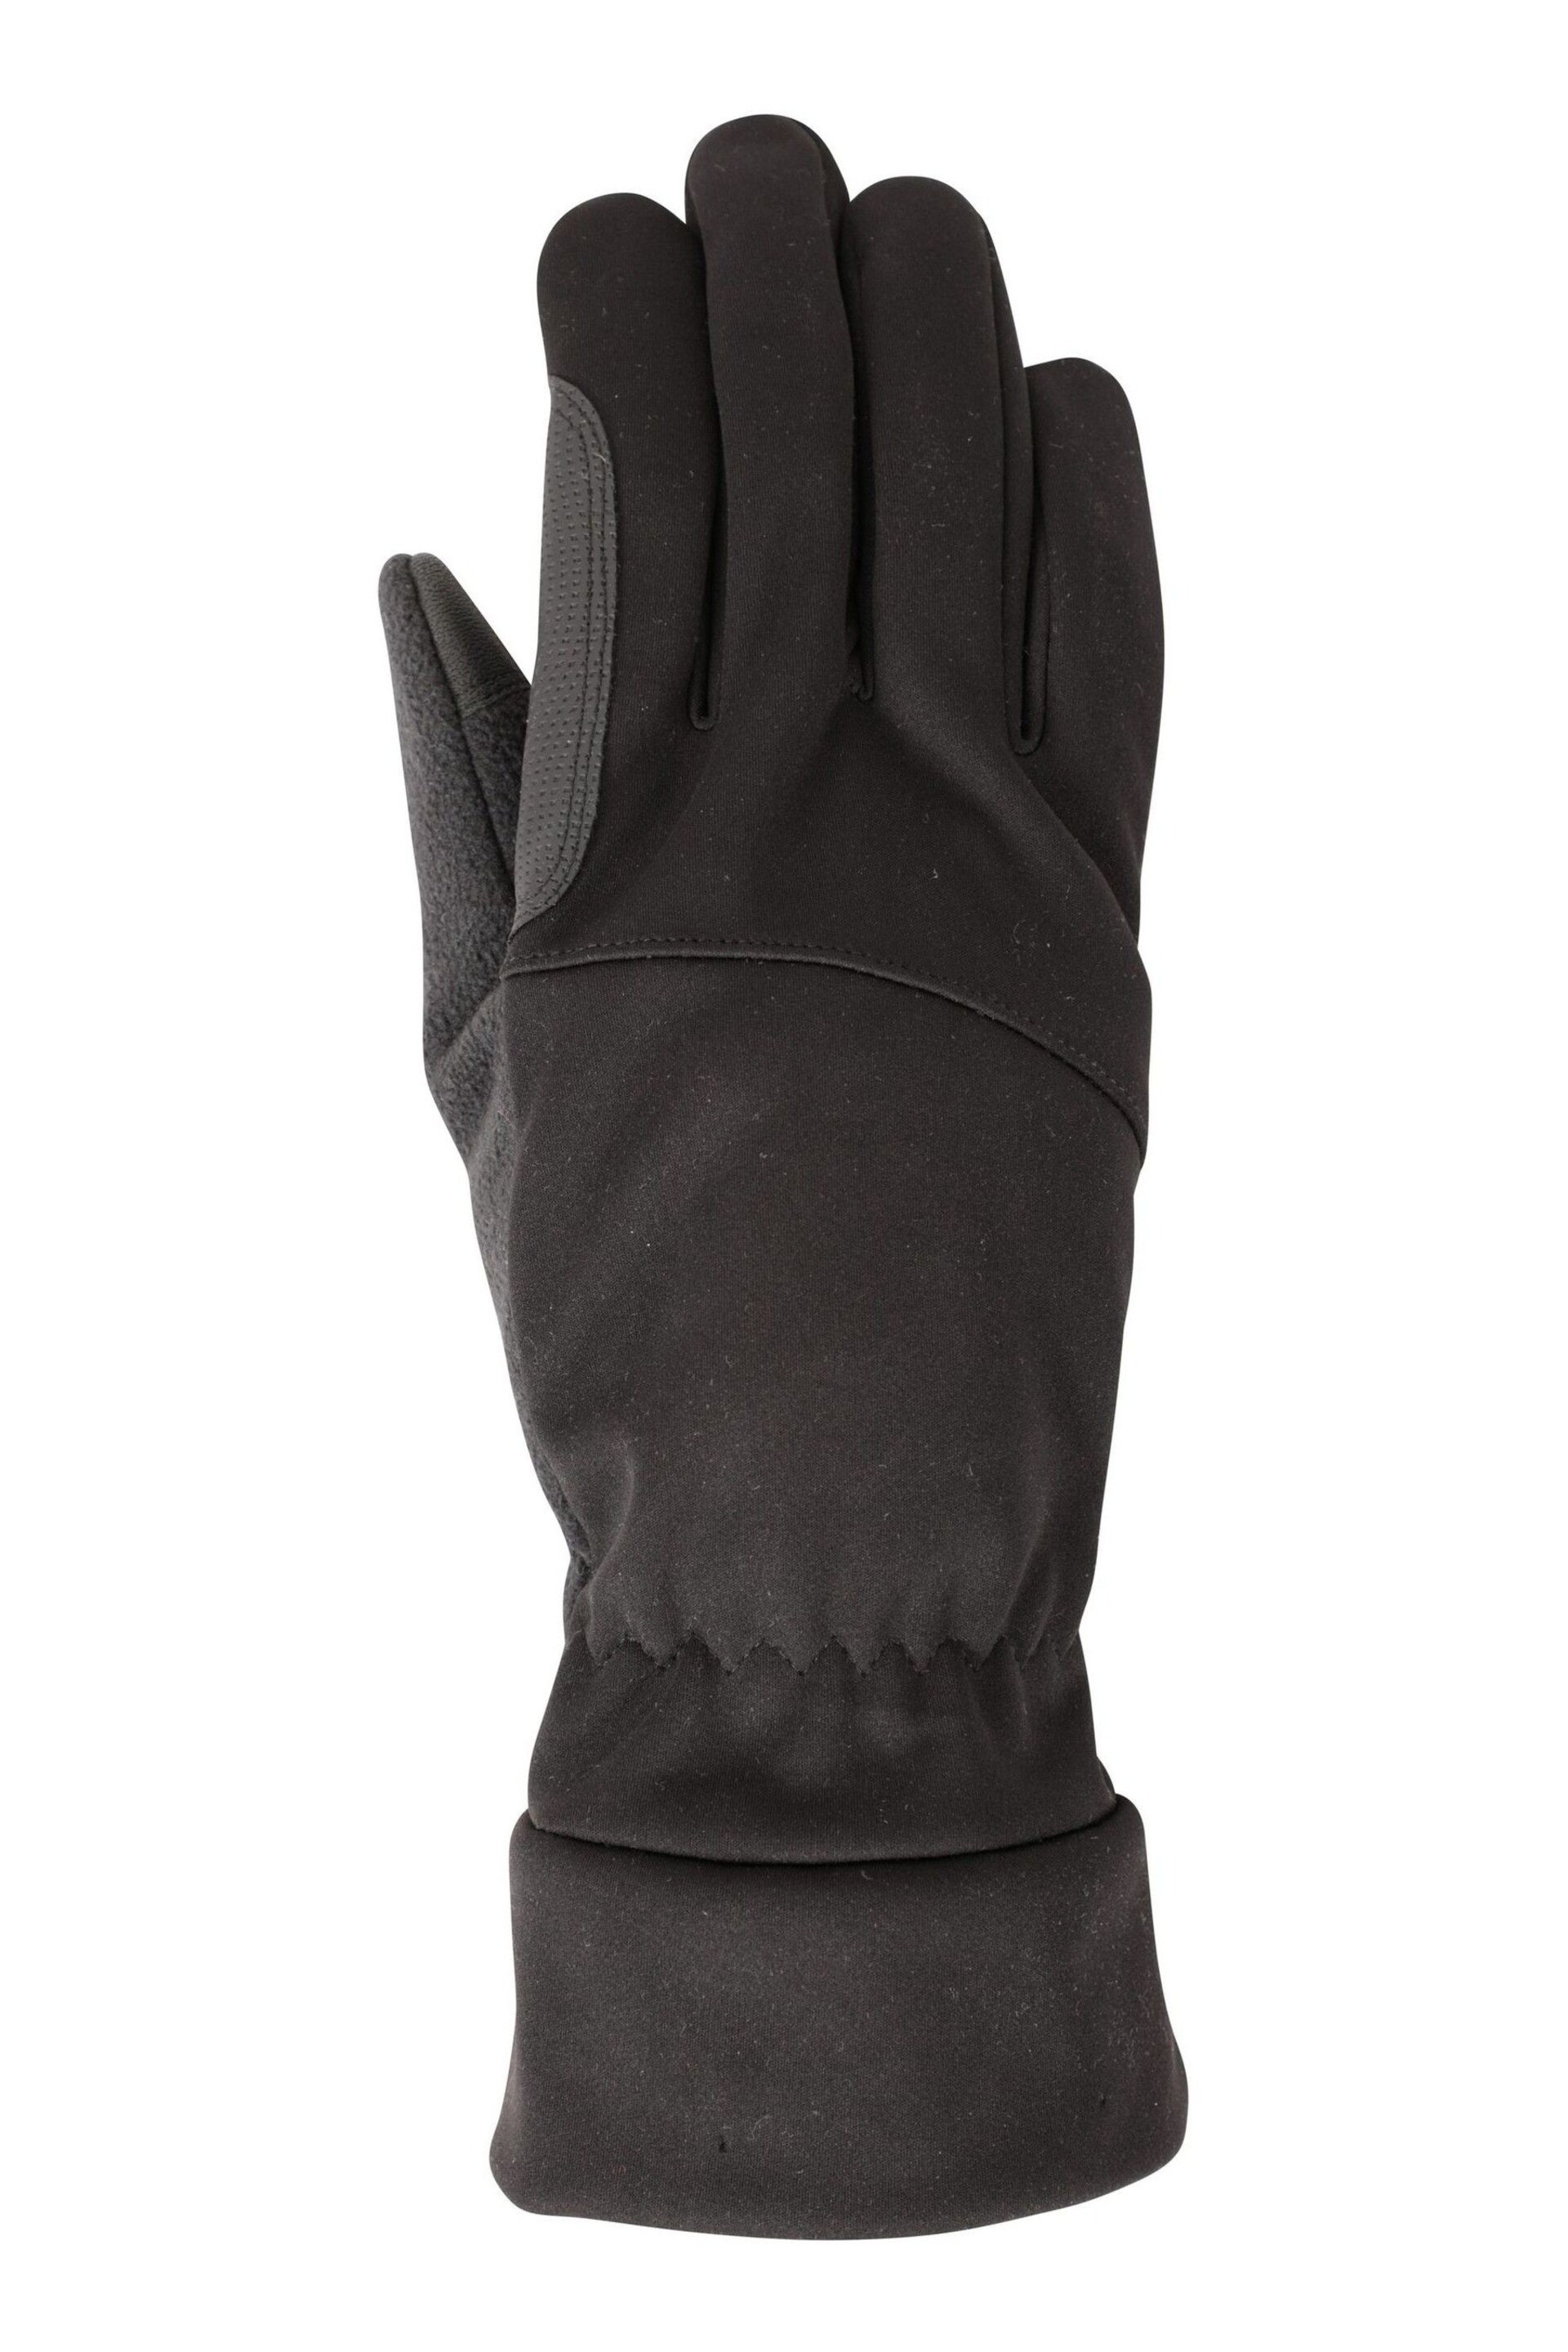 Mountain Warehouse Black Softshell Touchscreen Mens Gloves - Image 3 of 5